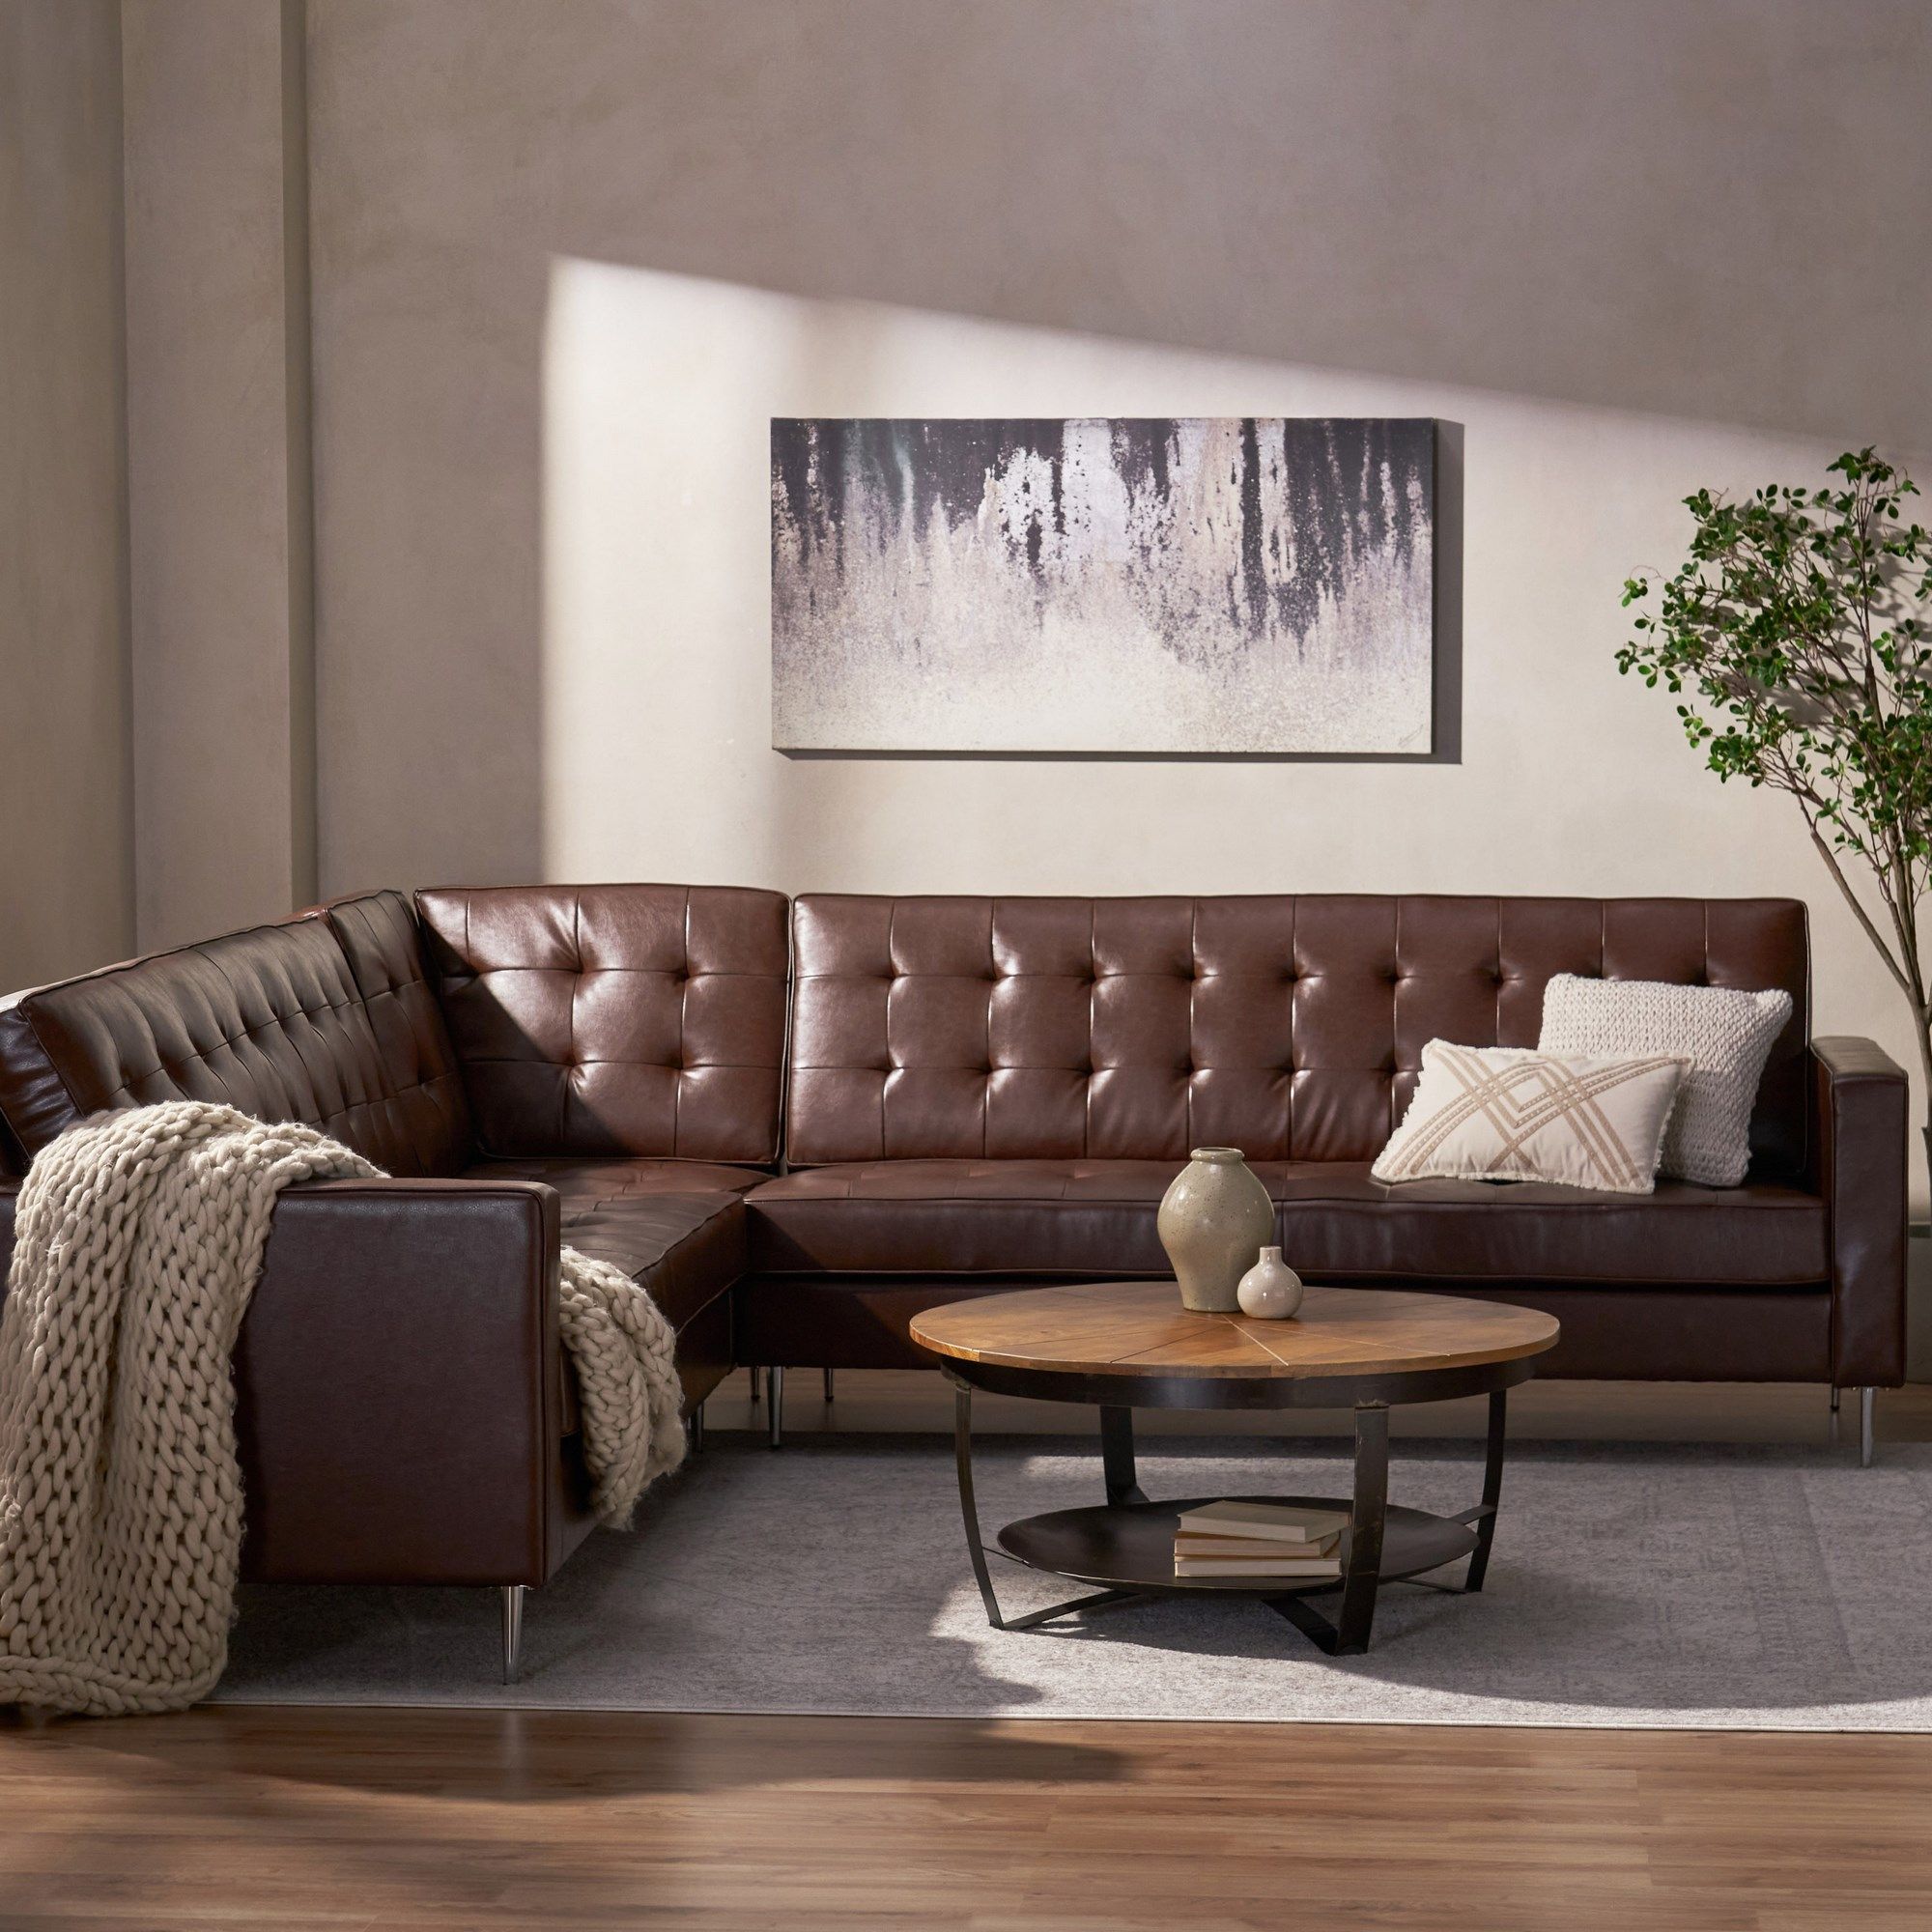 Gebo Contemporary Faux Leather Tufted 5 Seater Sectional Sofa Set, Dark  Brown And Chrome With Faux Leather Sectional Sofa Sets (View 5 of 15)